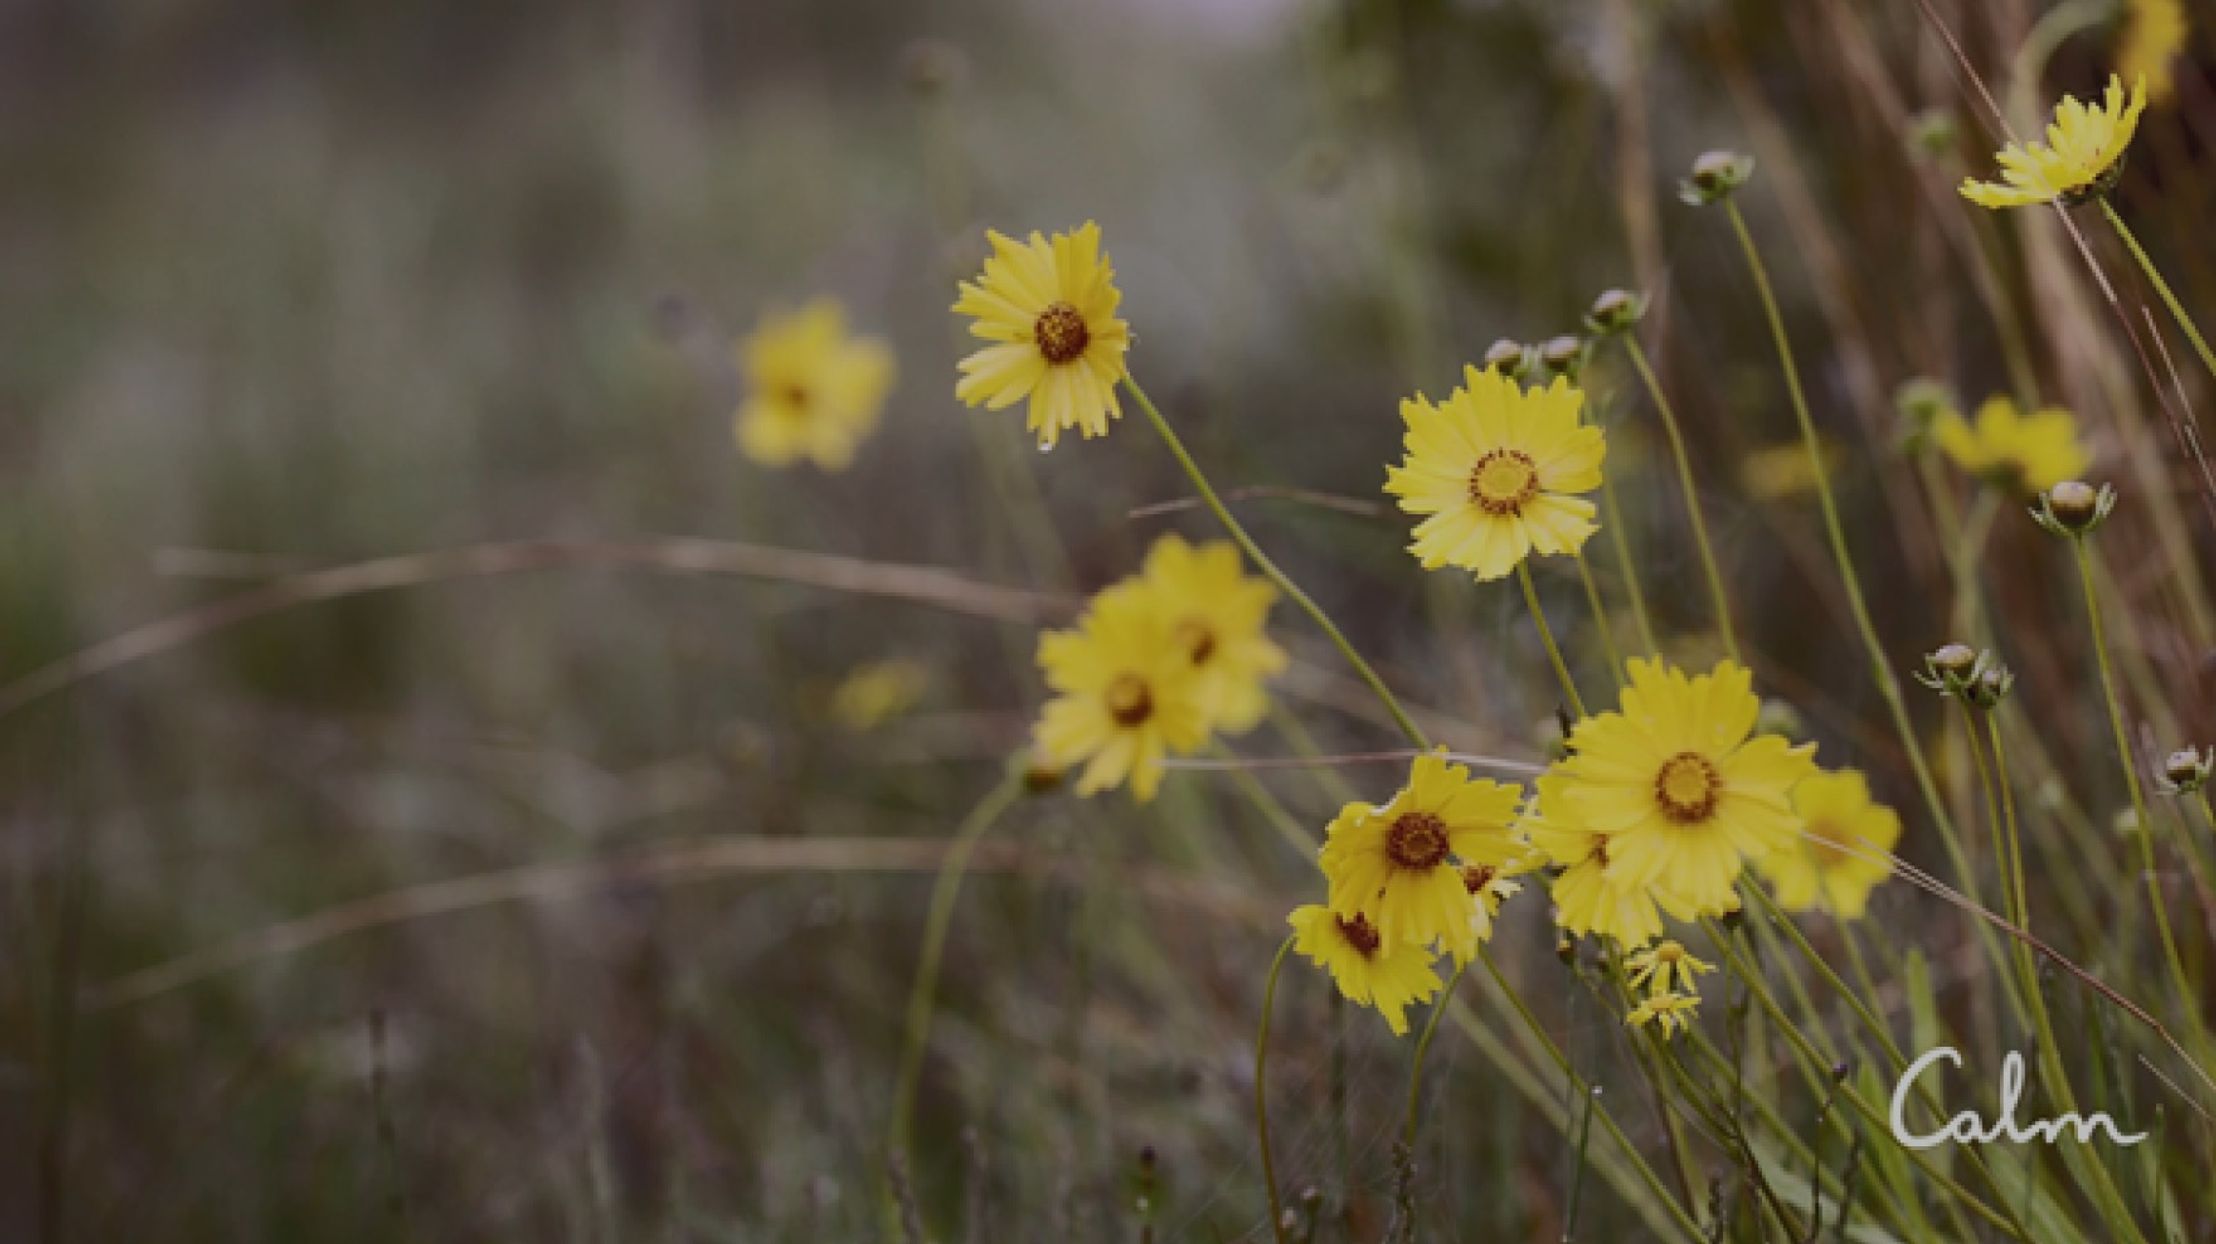 A group of several small yellow flowers growing together in a grass field. The Calm logo is in the lower right corner.